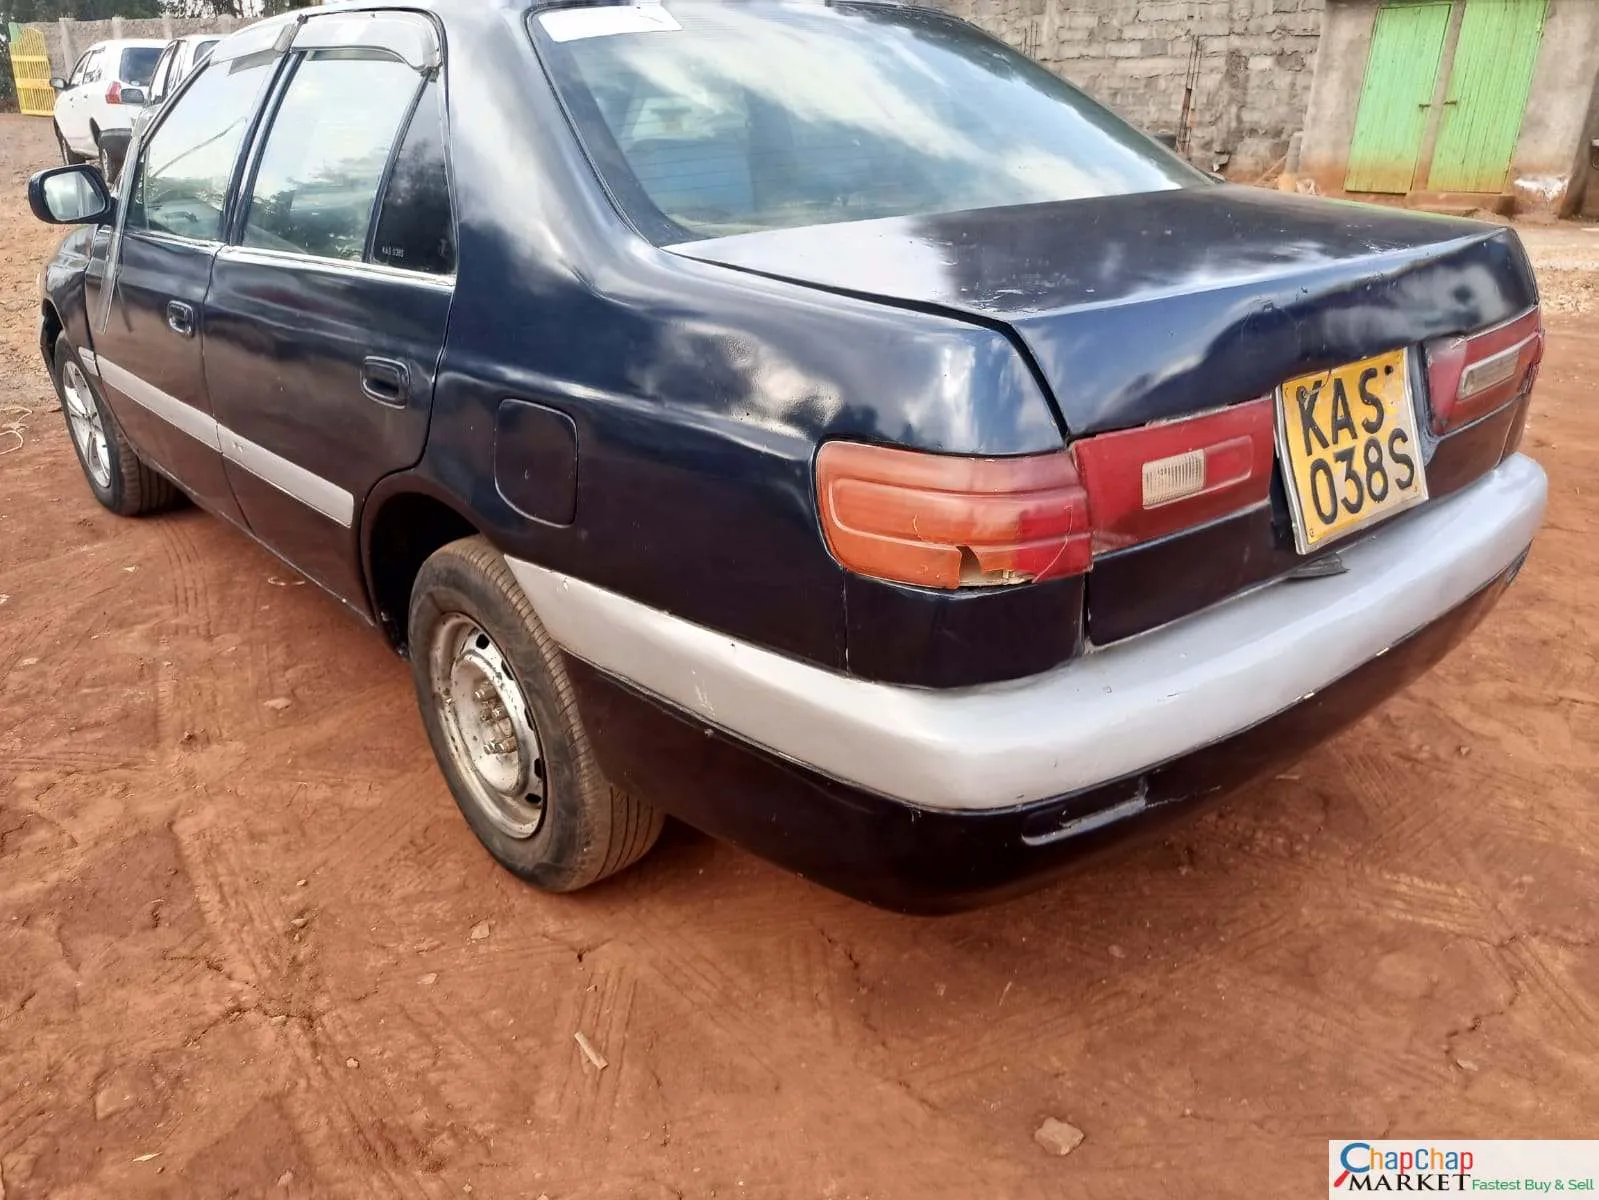 Toyota Premio for sale in Kenya nyoka 220k ONLY You pay 50% Deposit Trade in Ok EXCLUSIVE